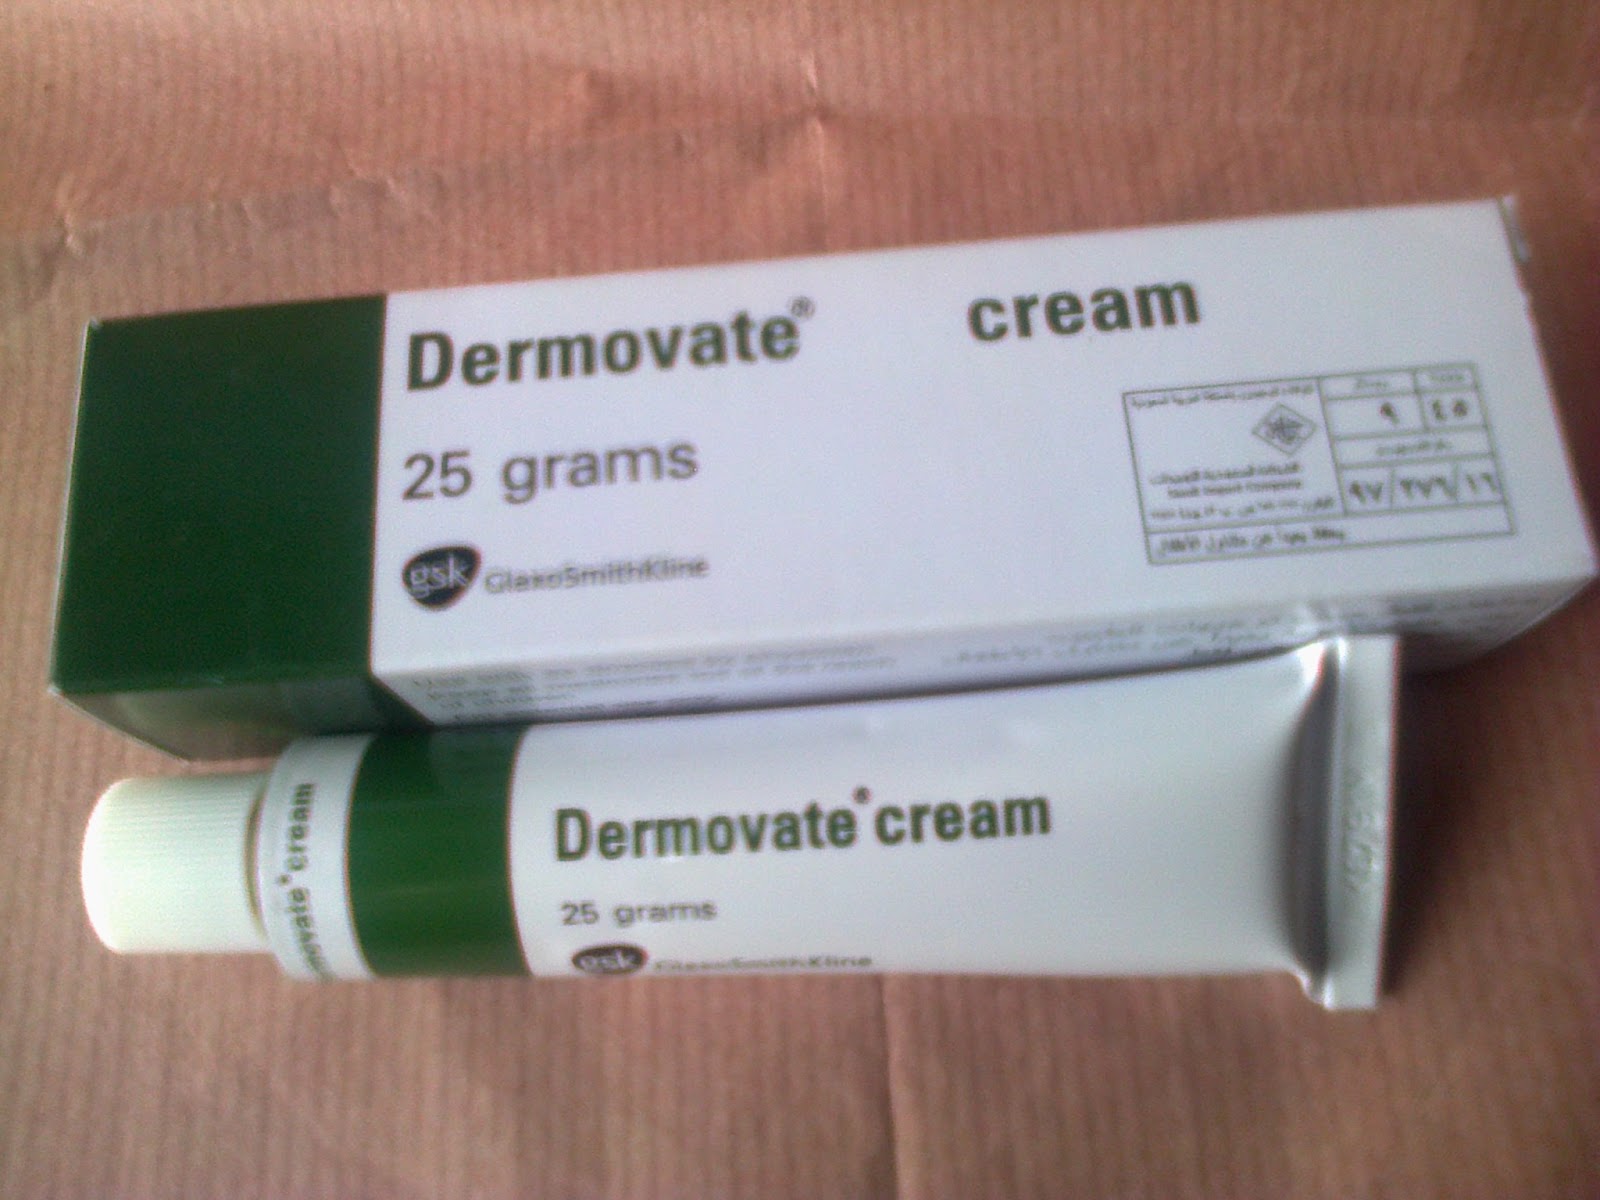 What is Dermovate ointment?